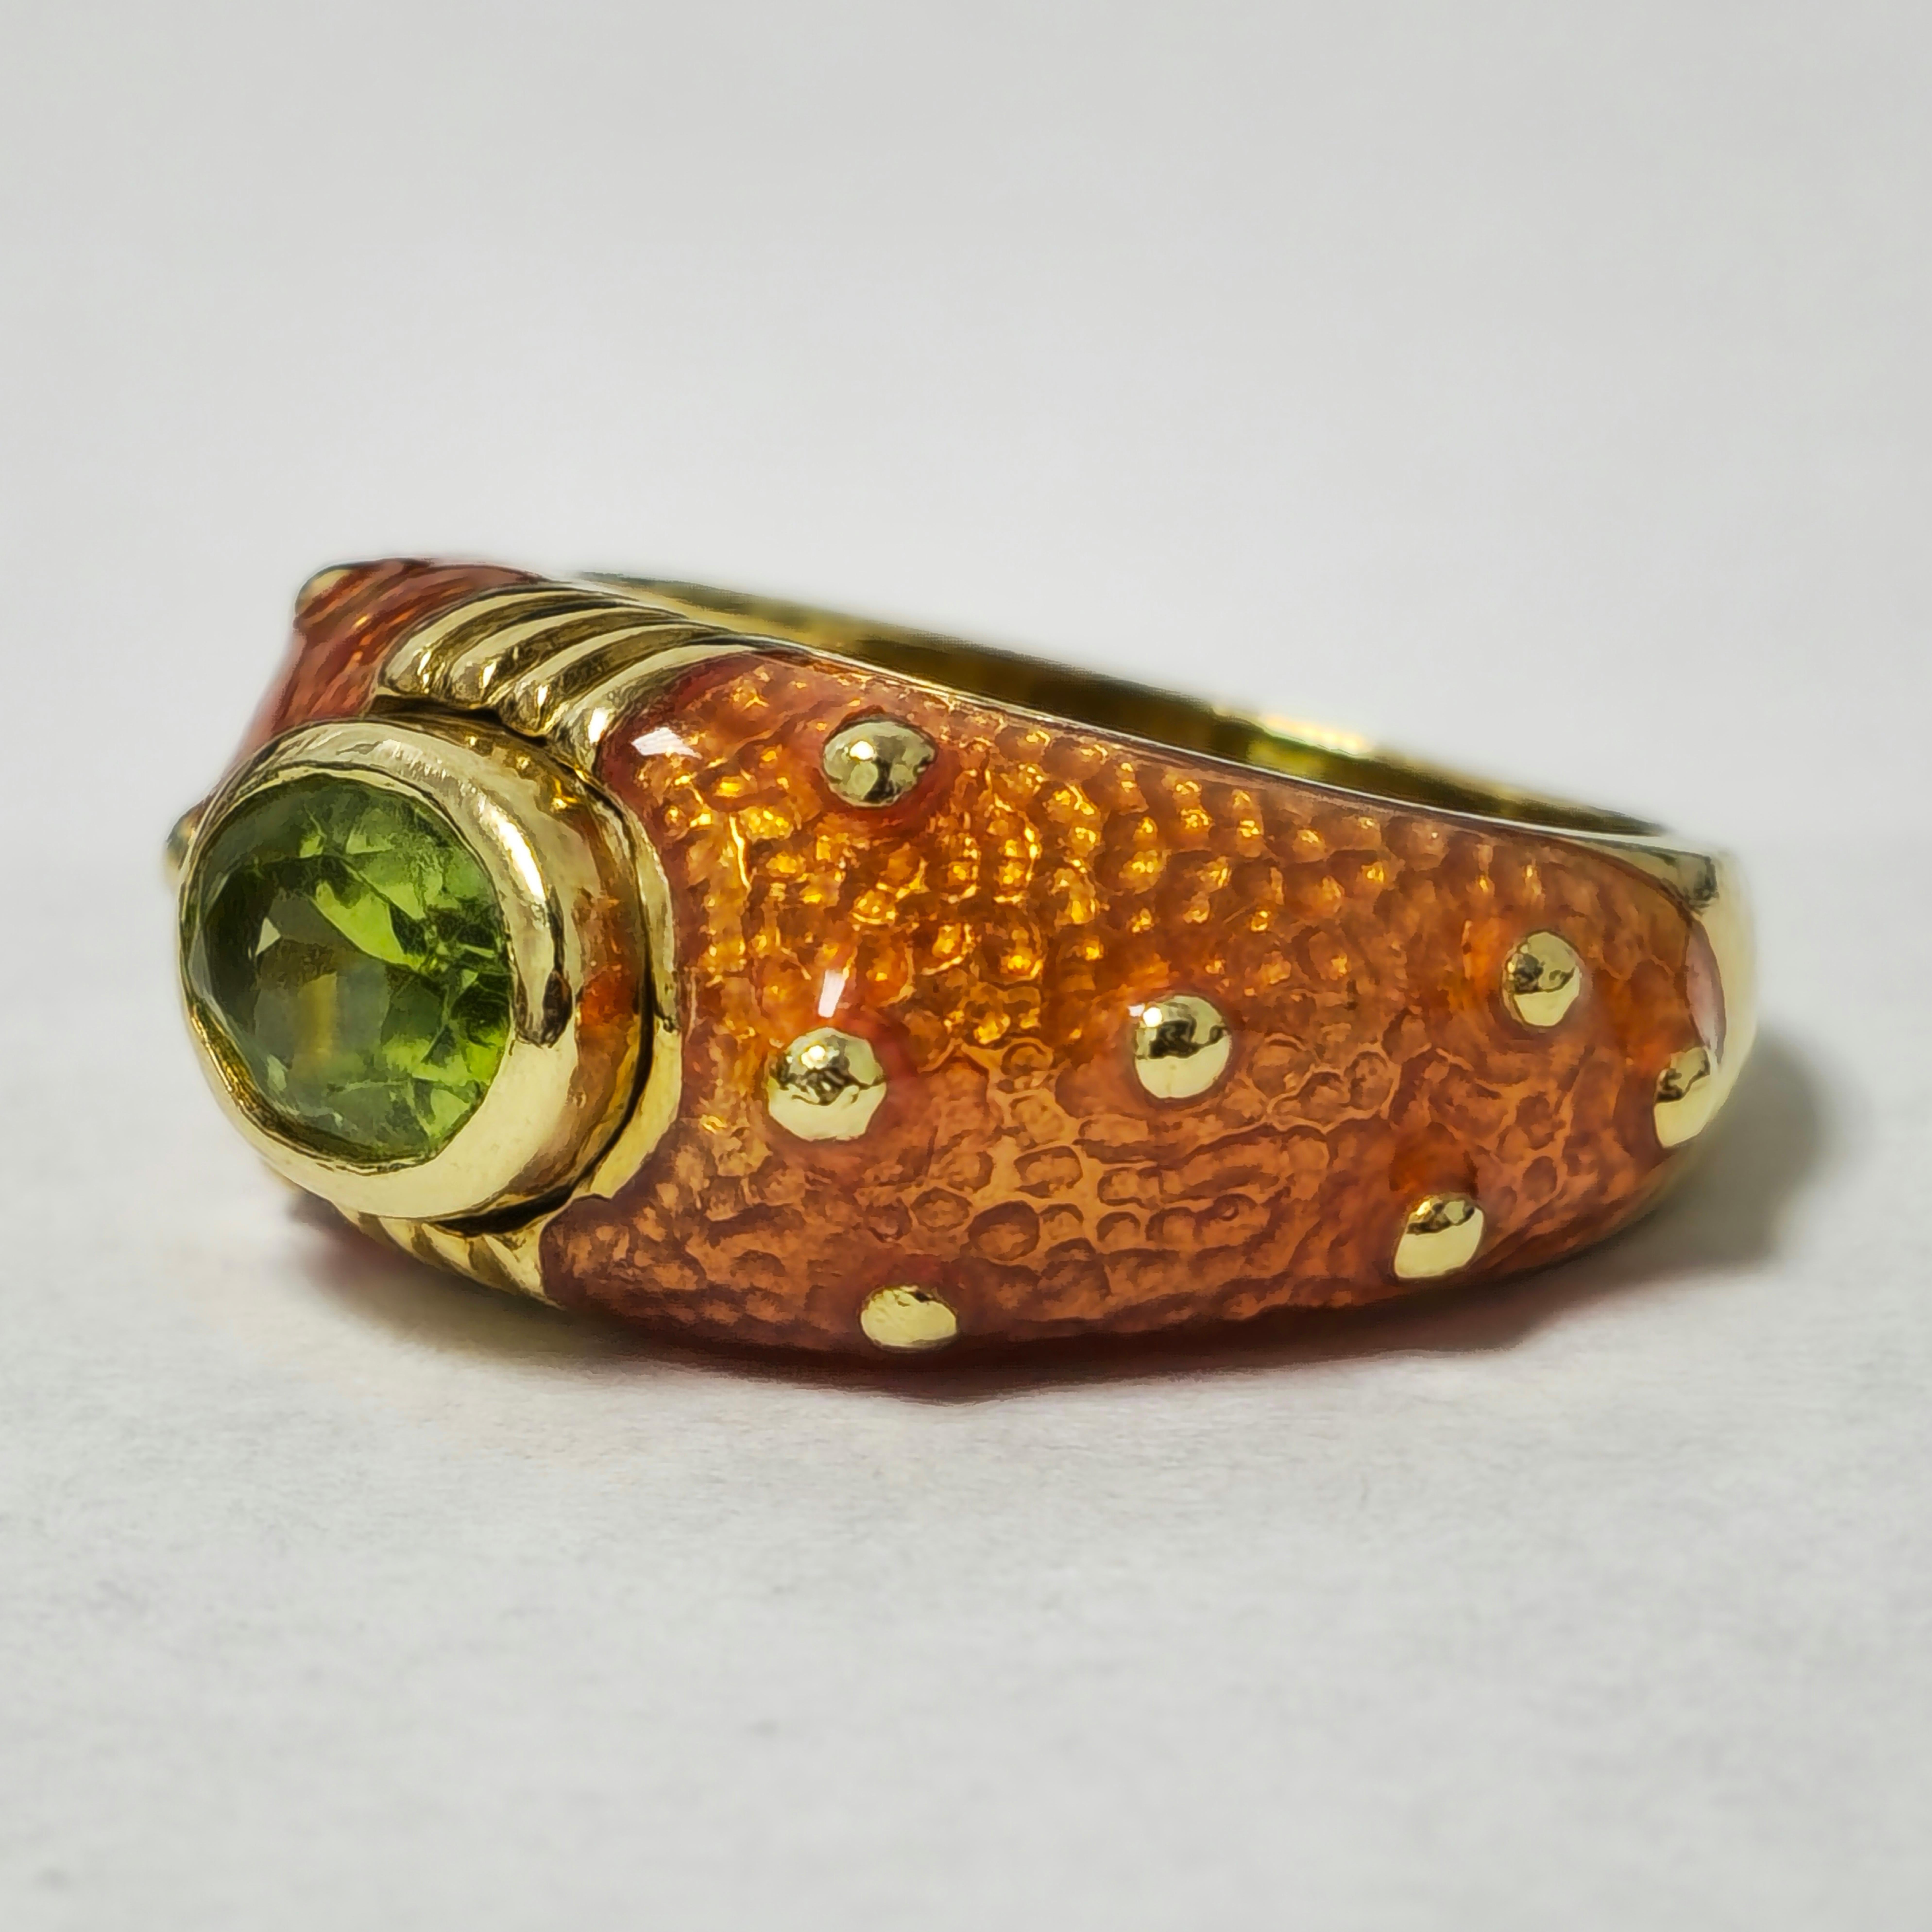 Add a touch of vintage elegance to your collection with this enchanting 10k yellow gold ring. At its heart lies a vibrant 1.22 carat green peridot, exuding vivid color and captivating saturation. Mined from the earth, this natural gemstone adds a